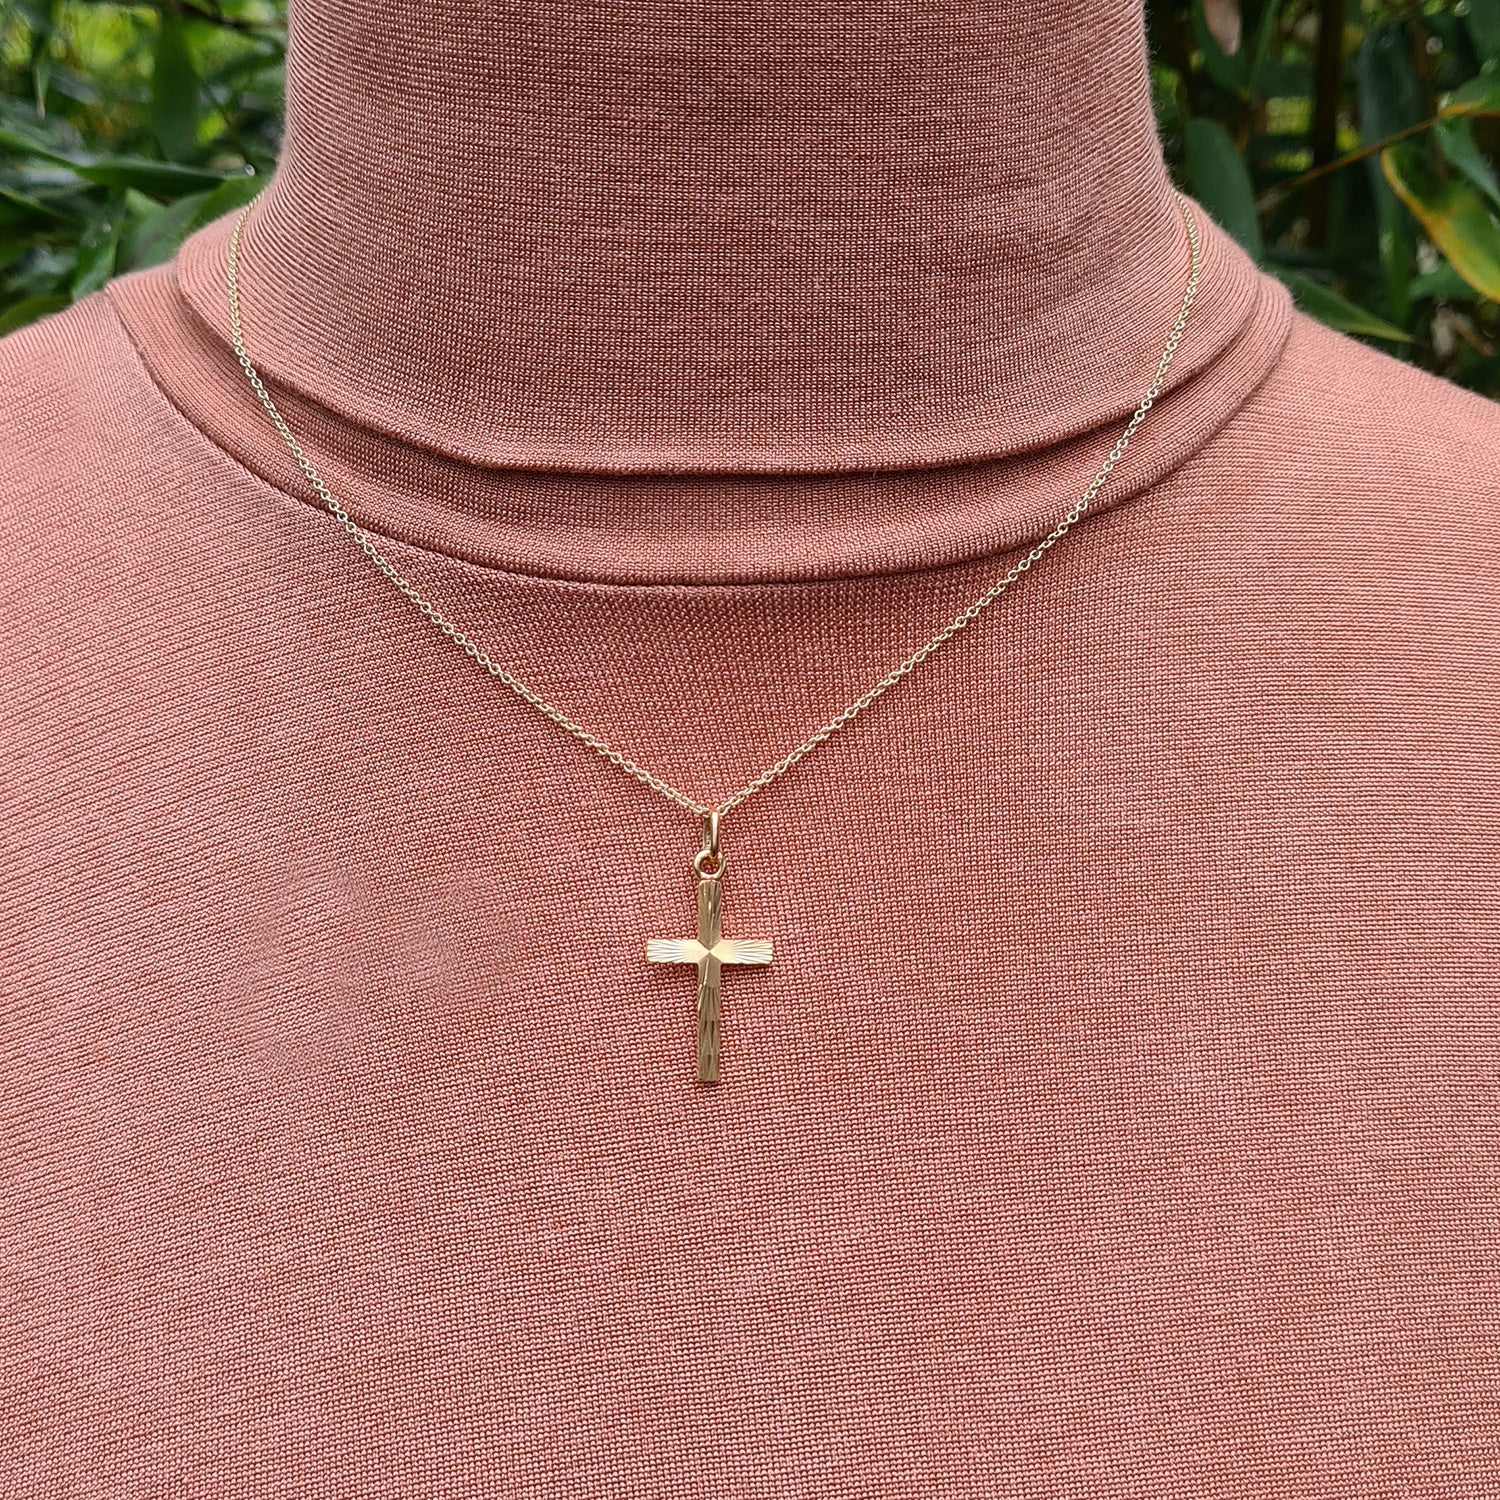 women's yellow gold cross necklace